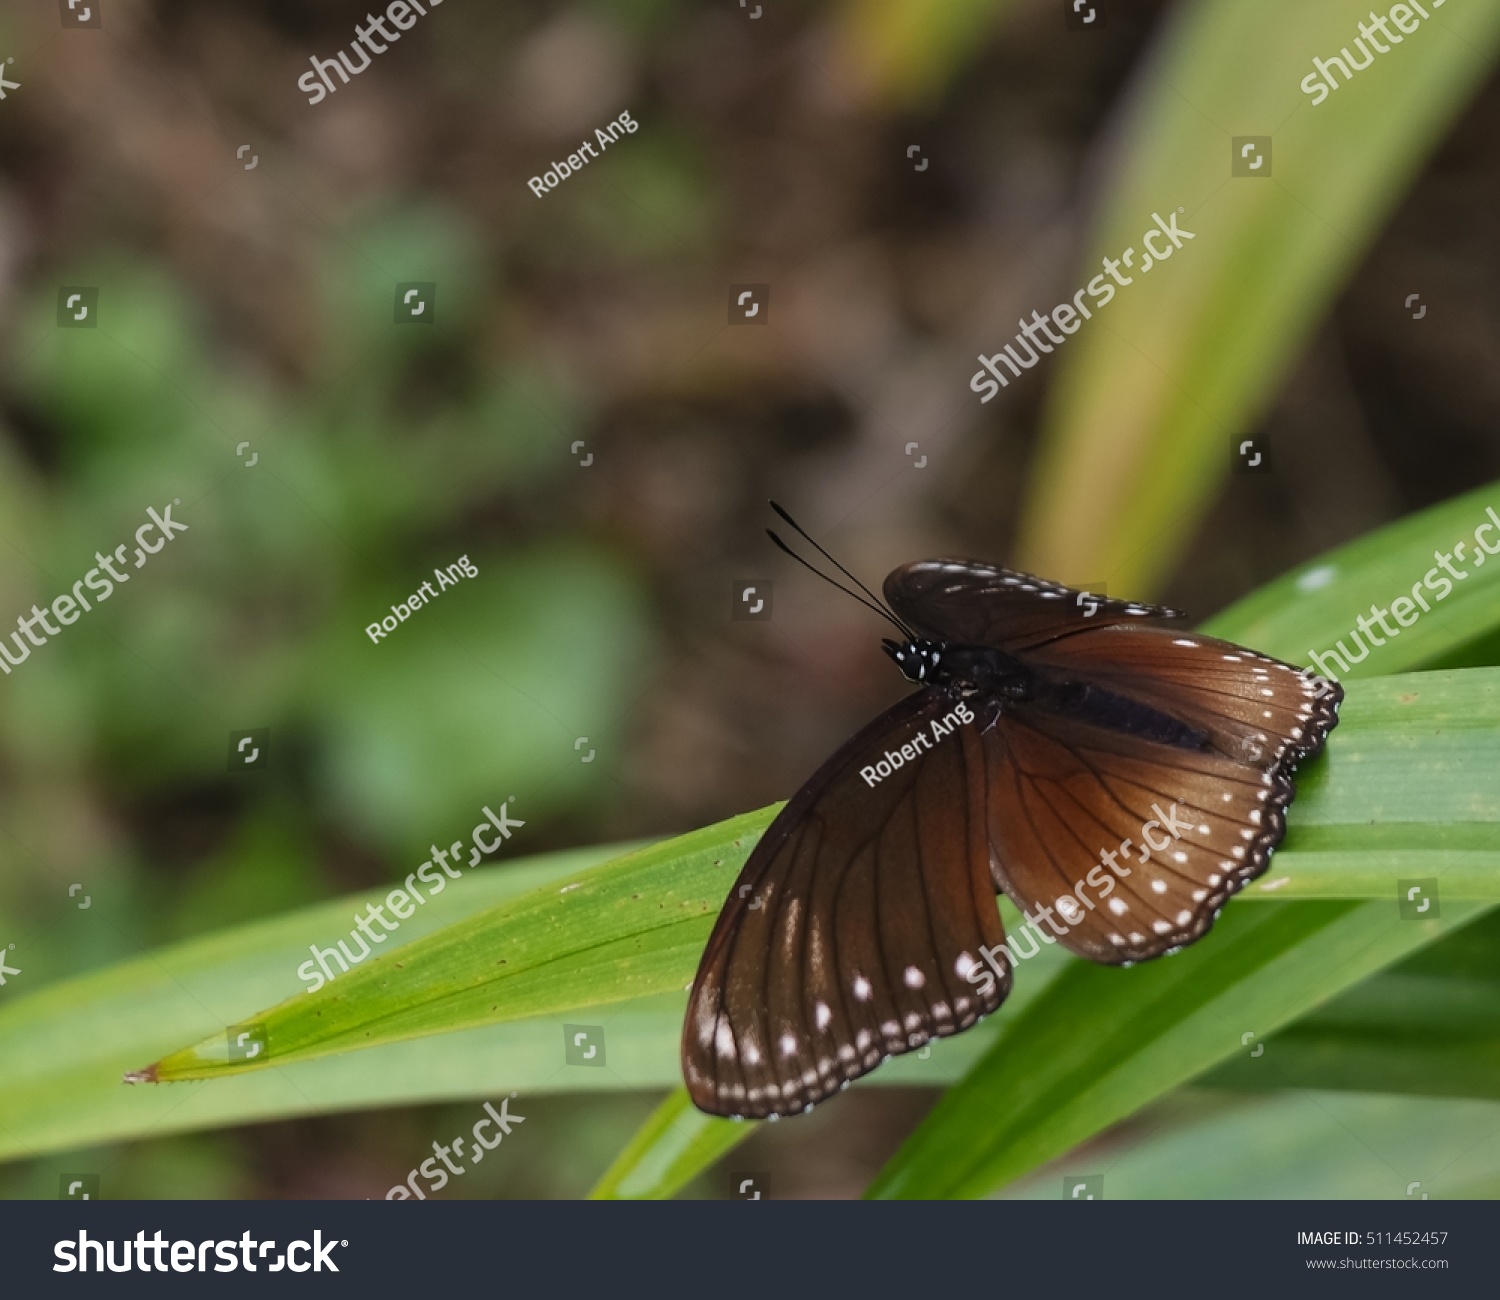 Malayan Eggfly Butterfly On Leaf Jungle Stock Photo 511452457 ...